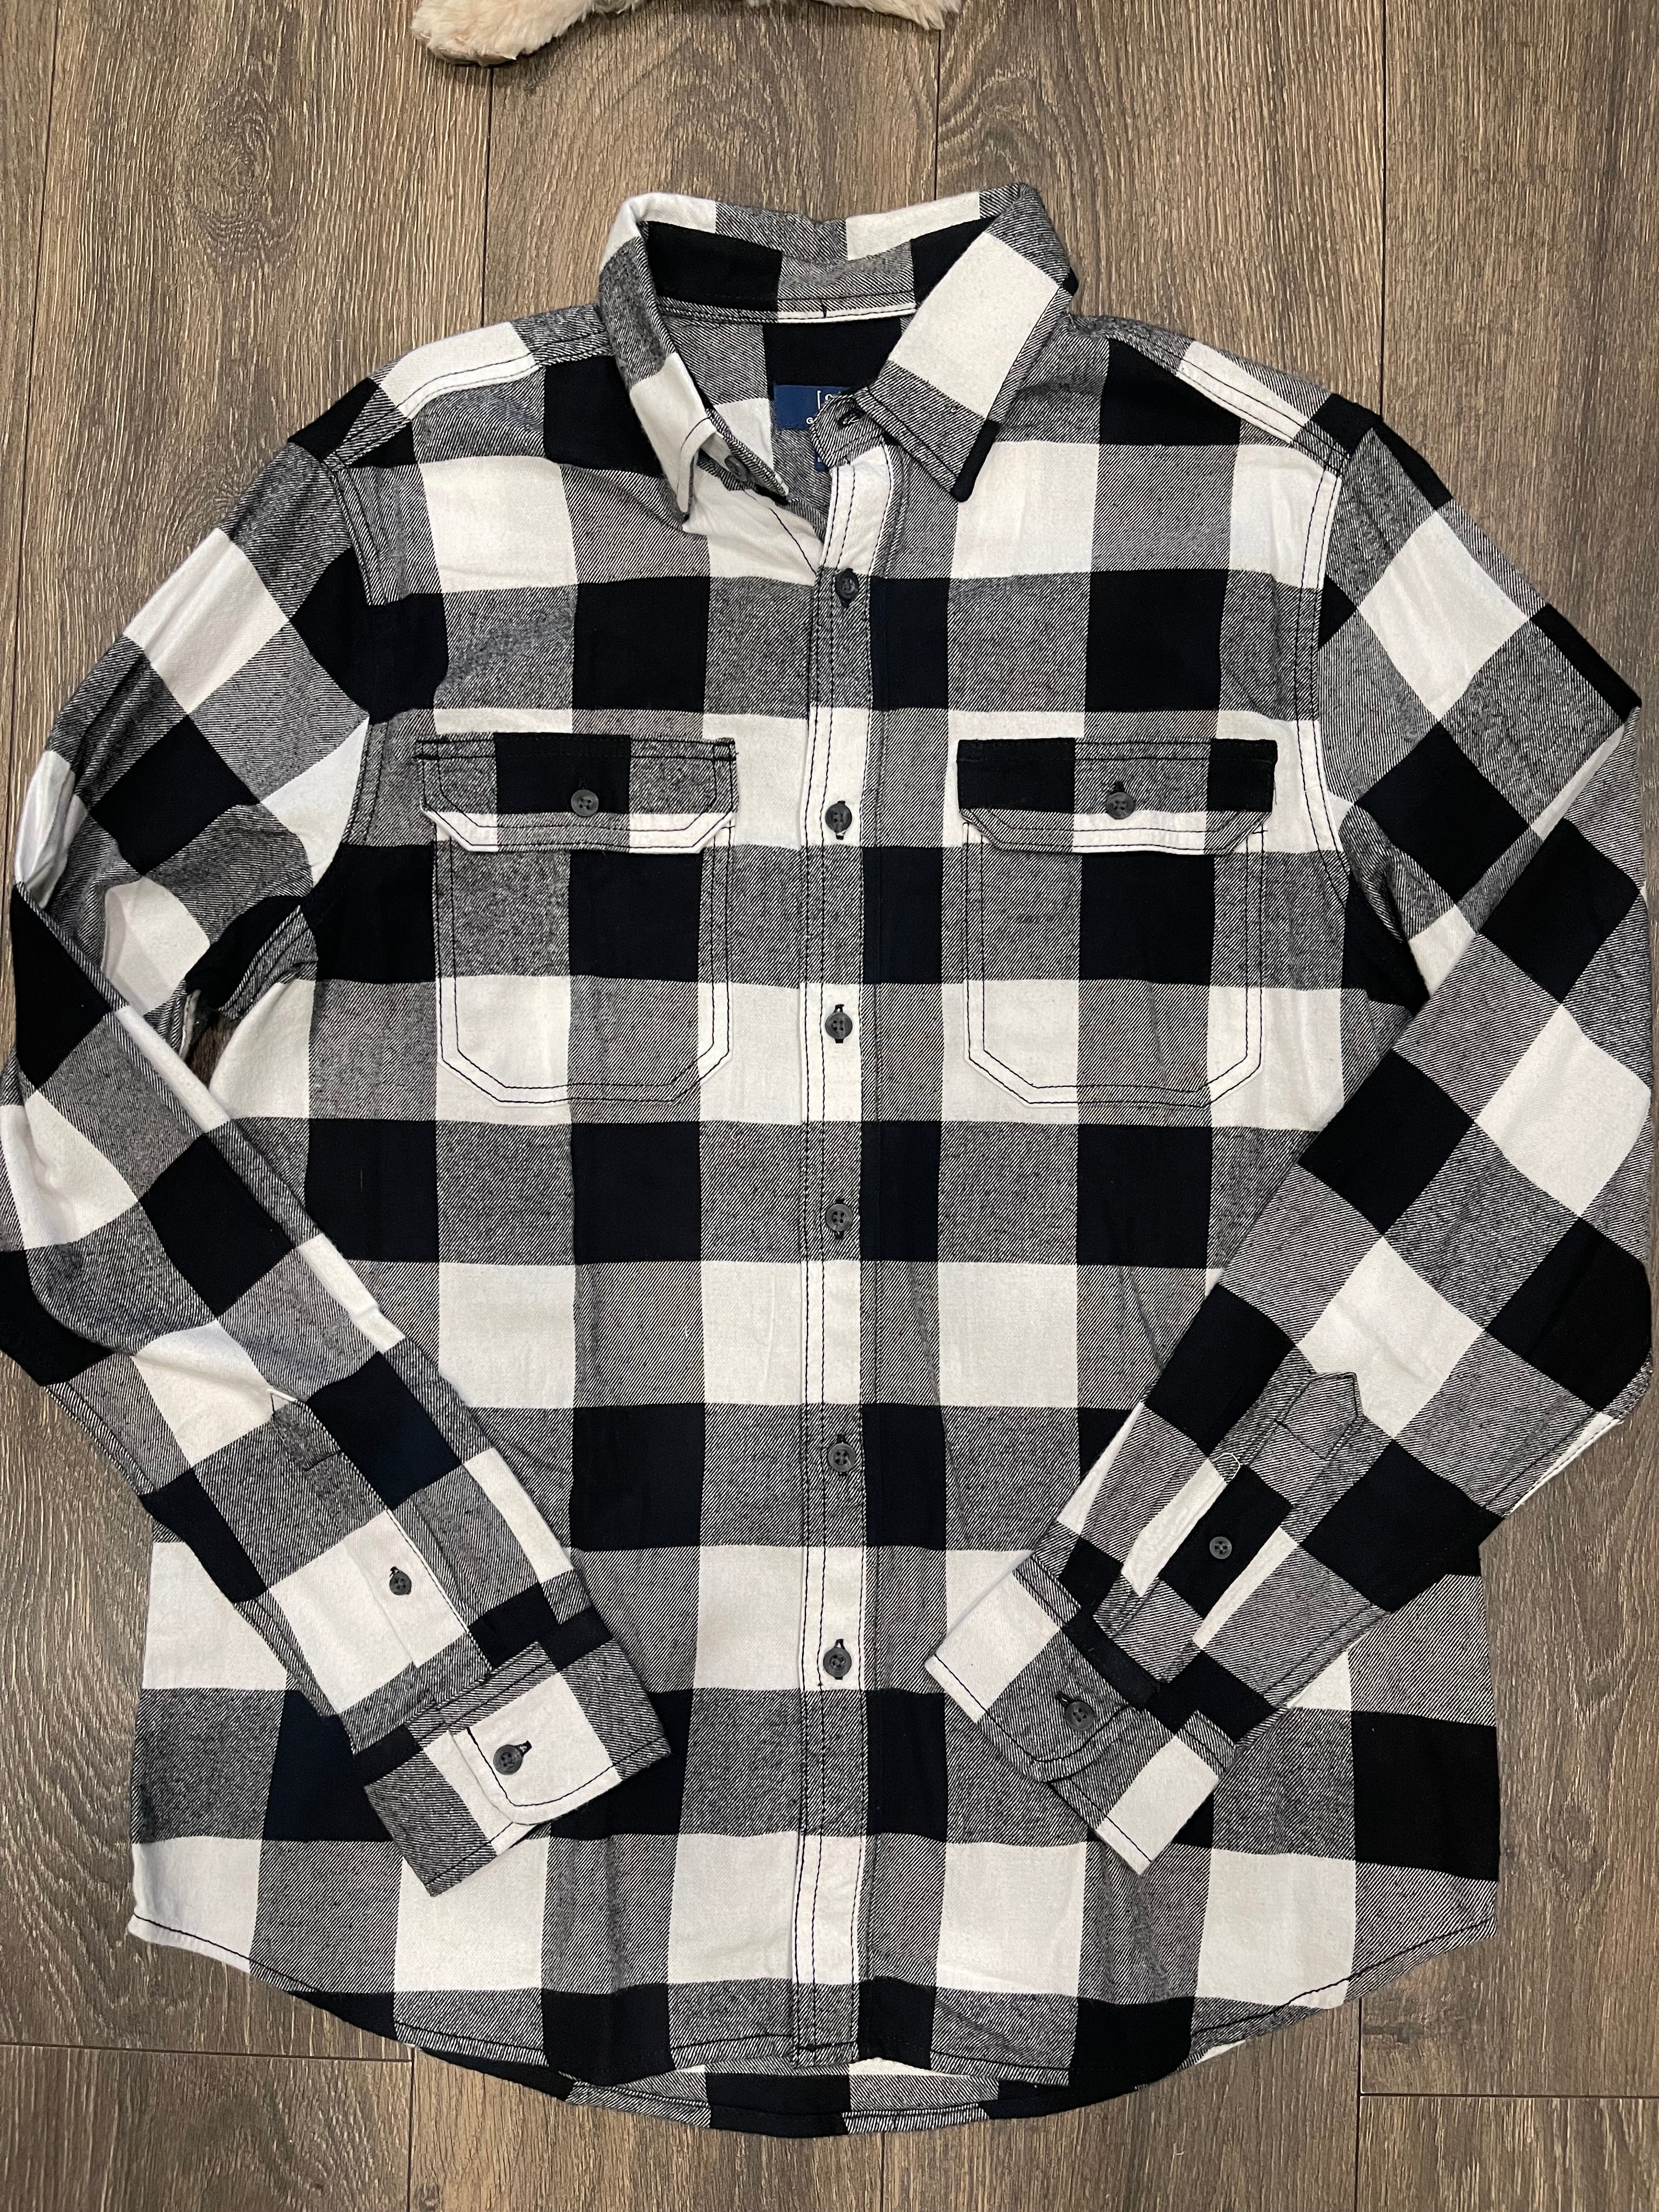 Dart Motorcycles Graphic Flannel